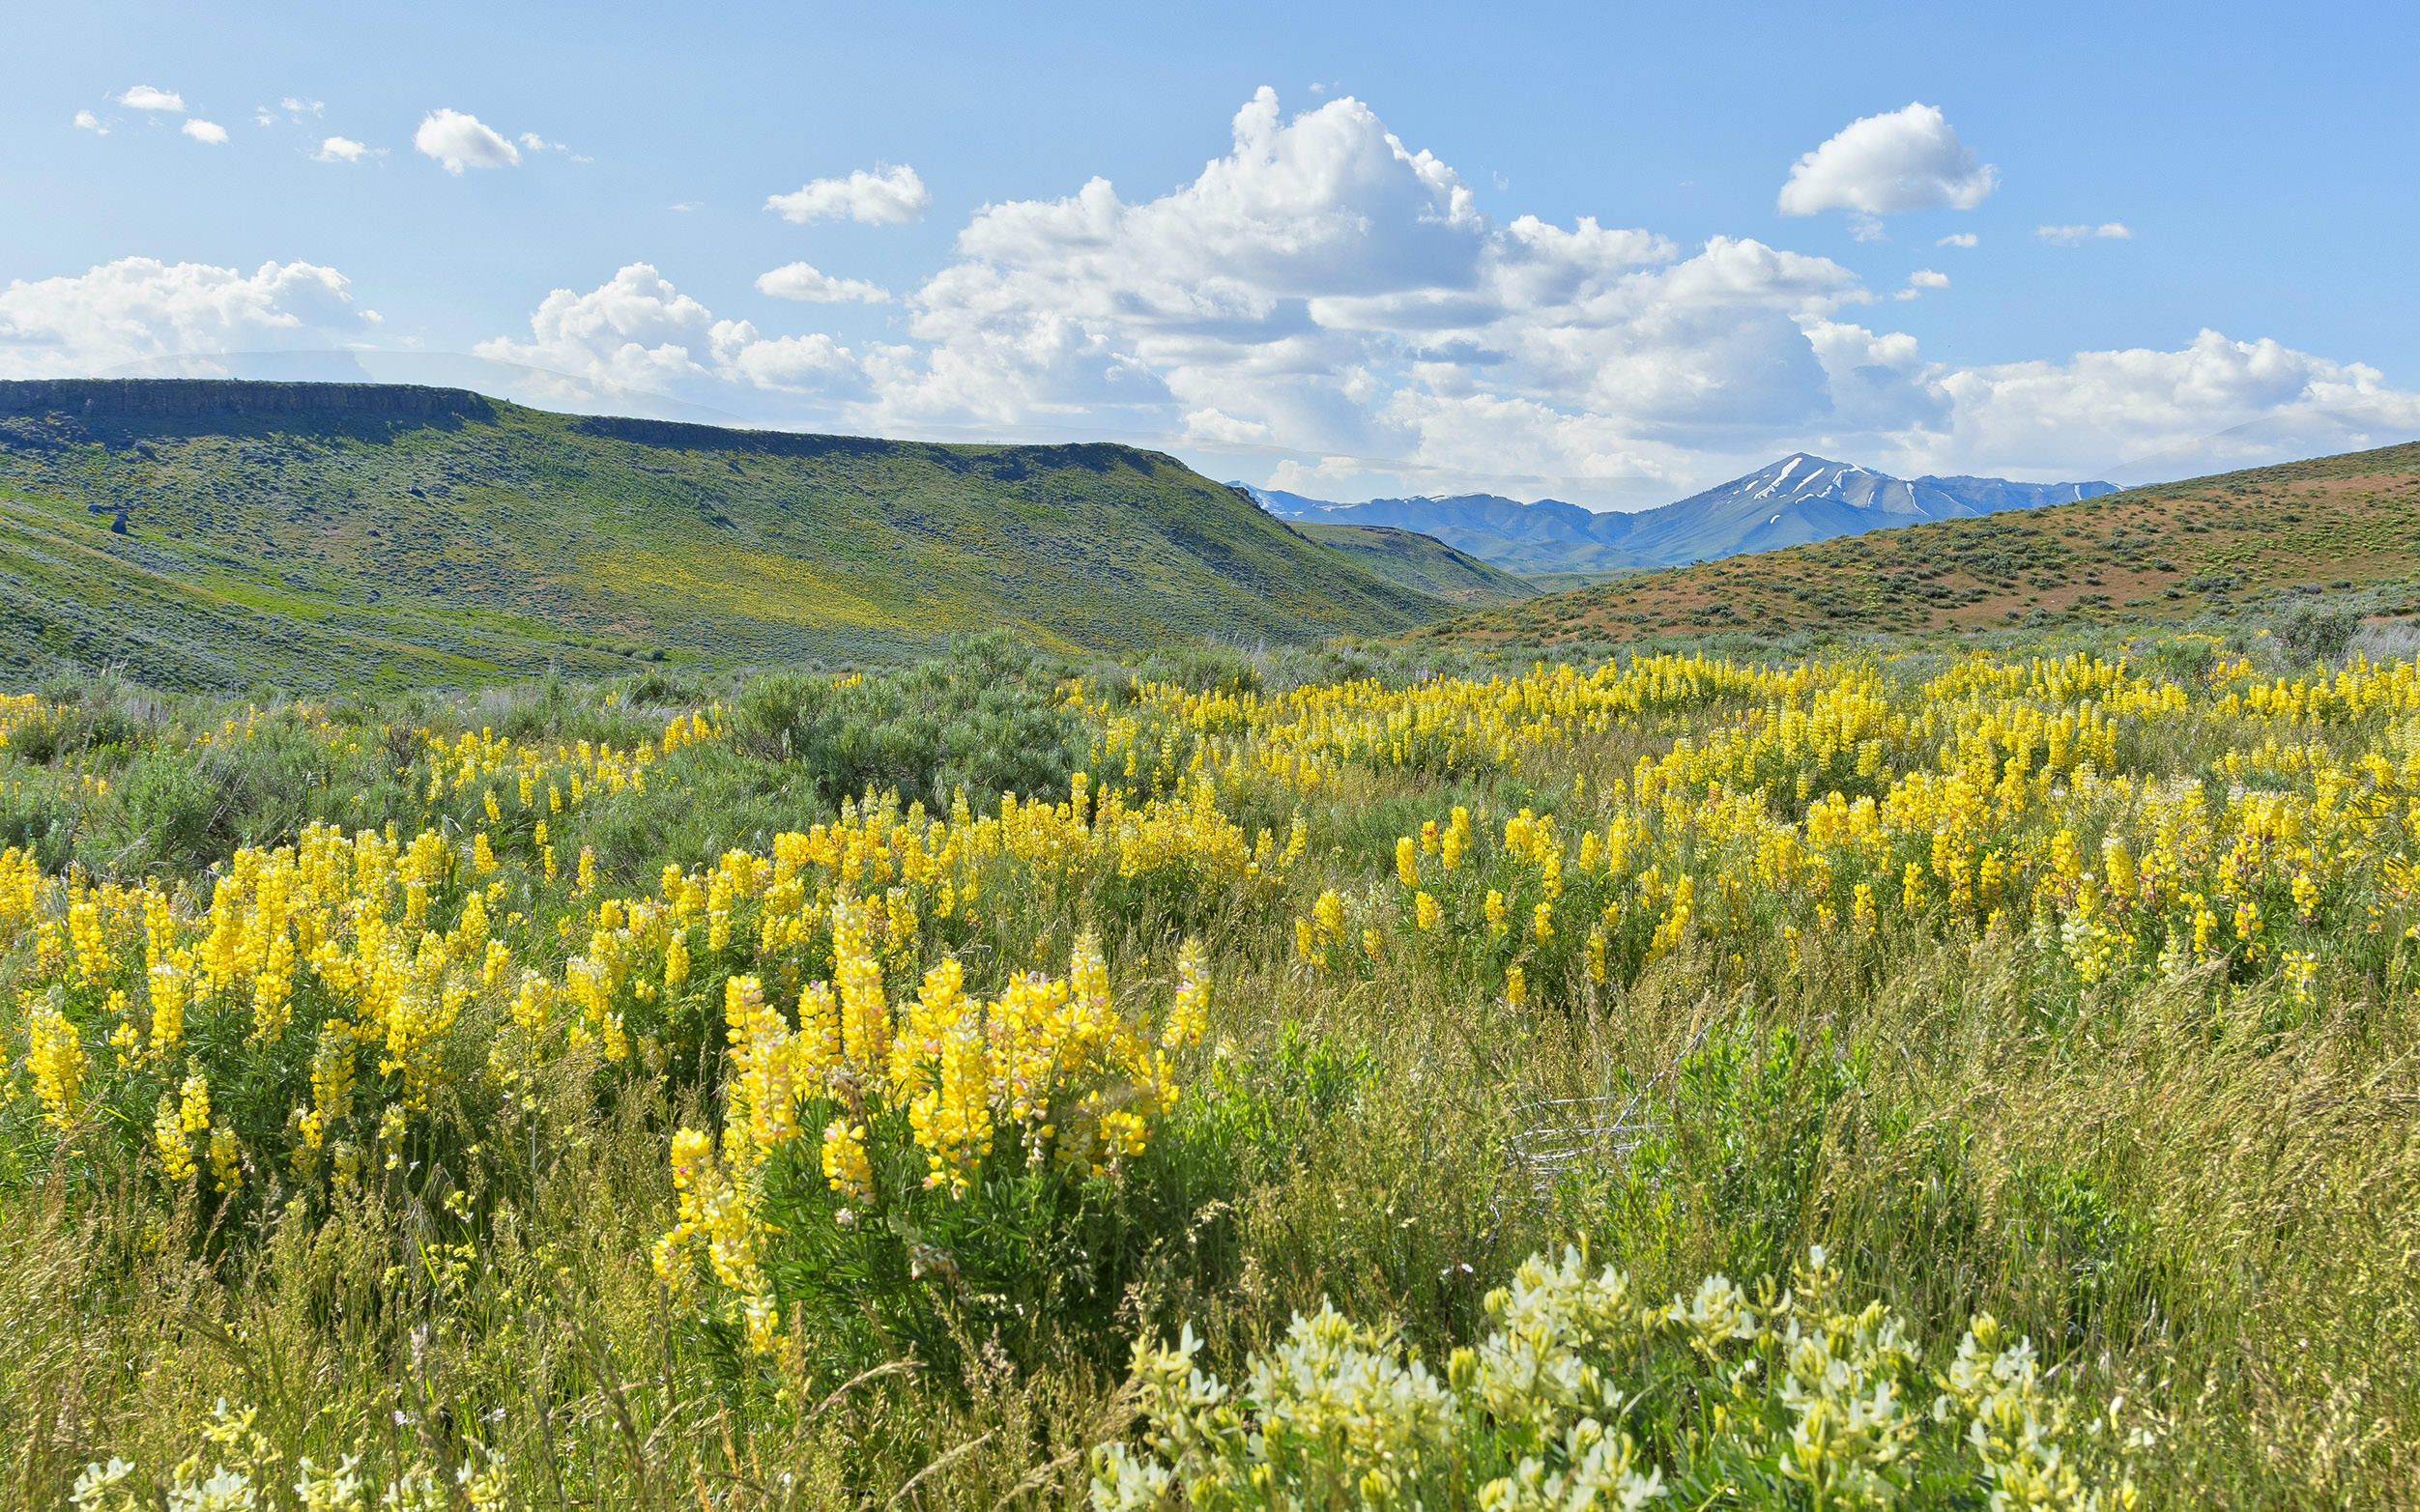 Sweeping landscape view of a field of yellow wildflowers growing in a valley, with mountains in the background.